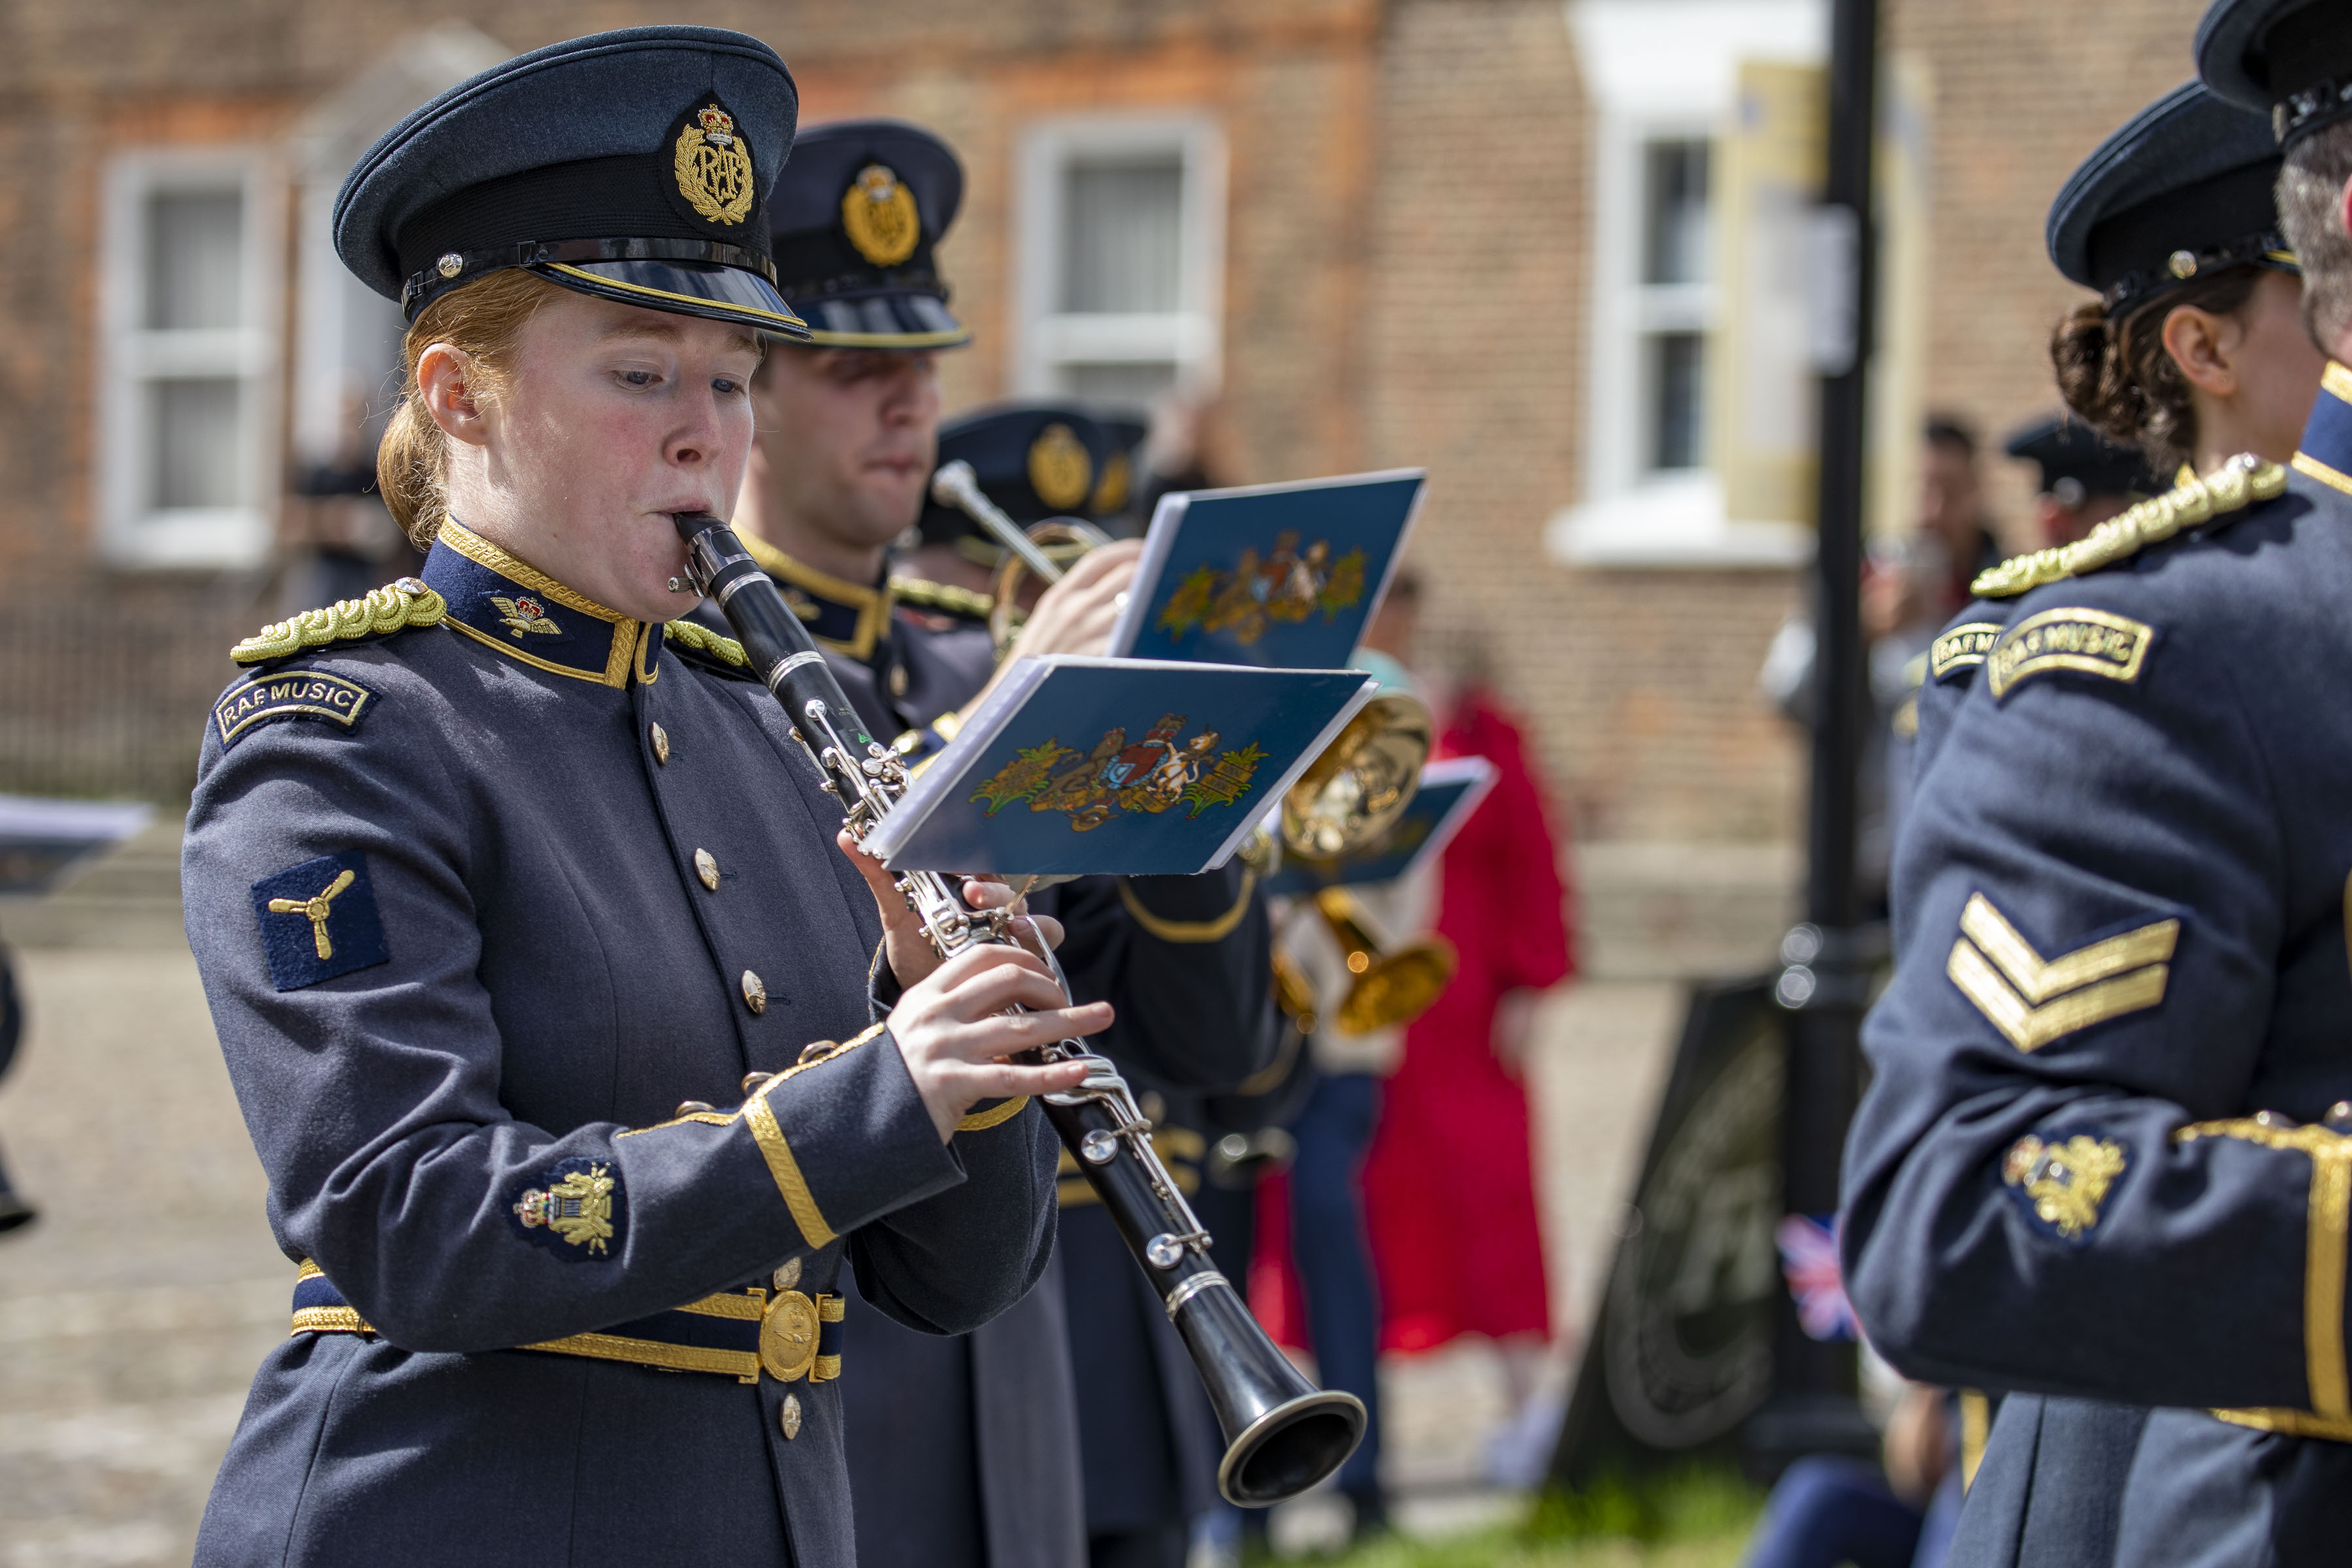 Image shows RAF Band in parade.